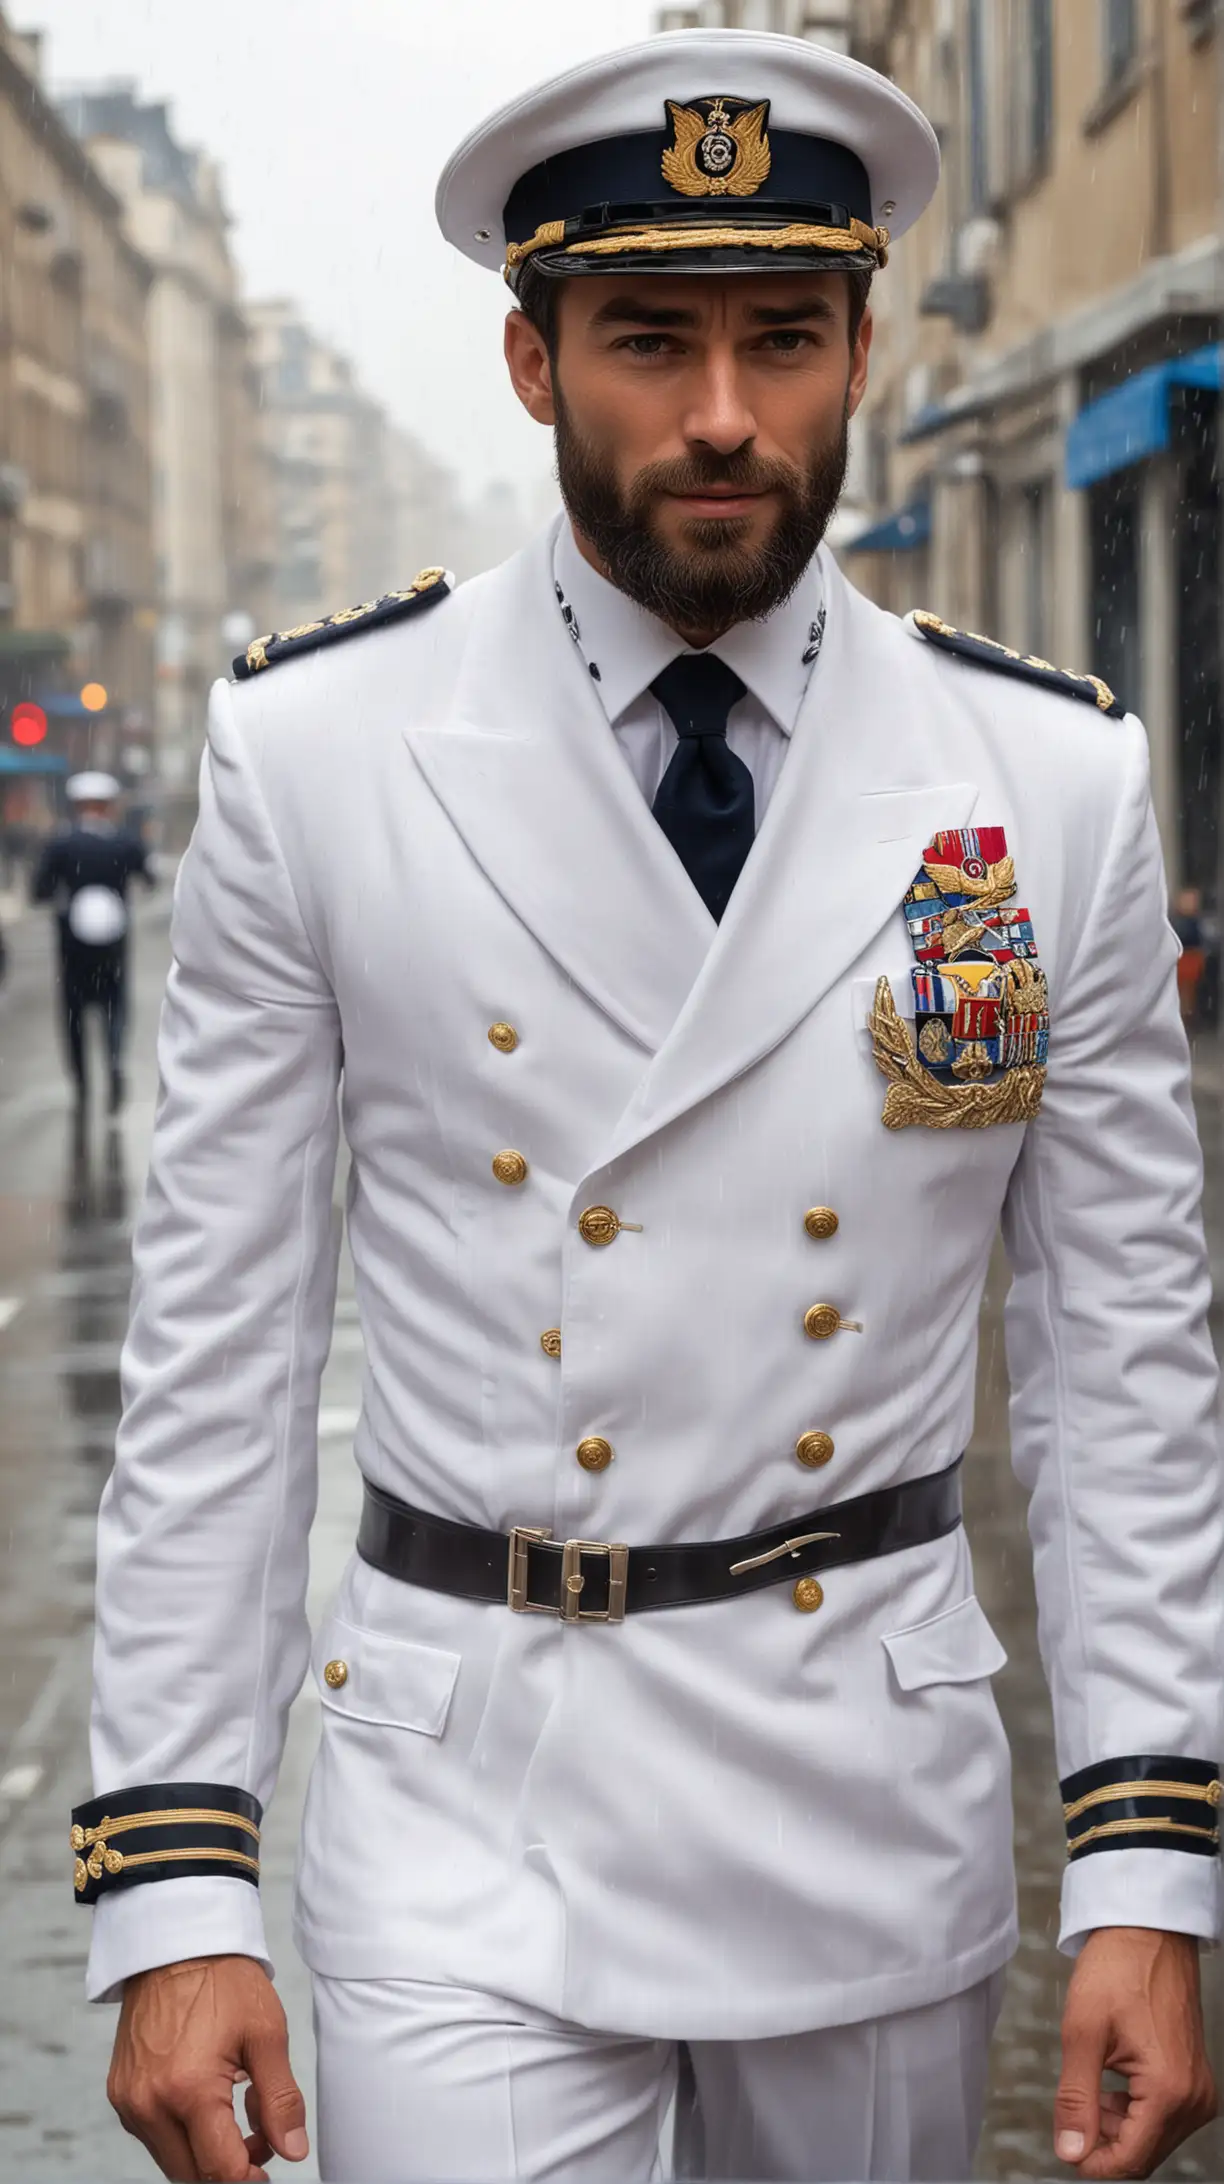 Attractive Navy Admiral Strolling in Rain with Muscular Physique